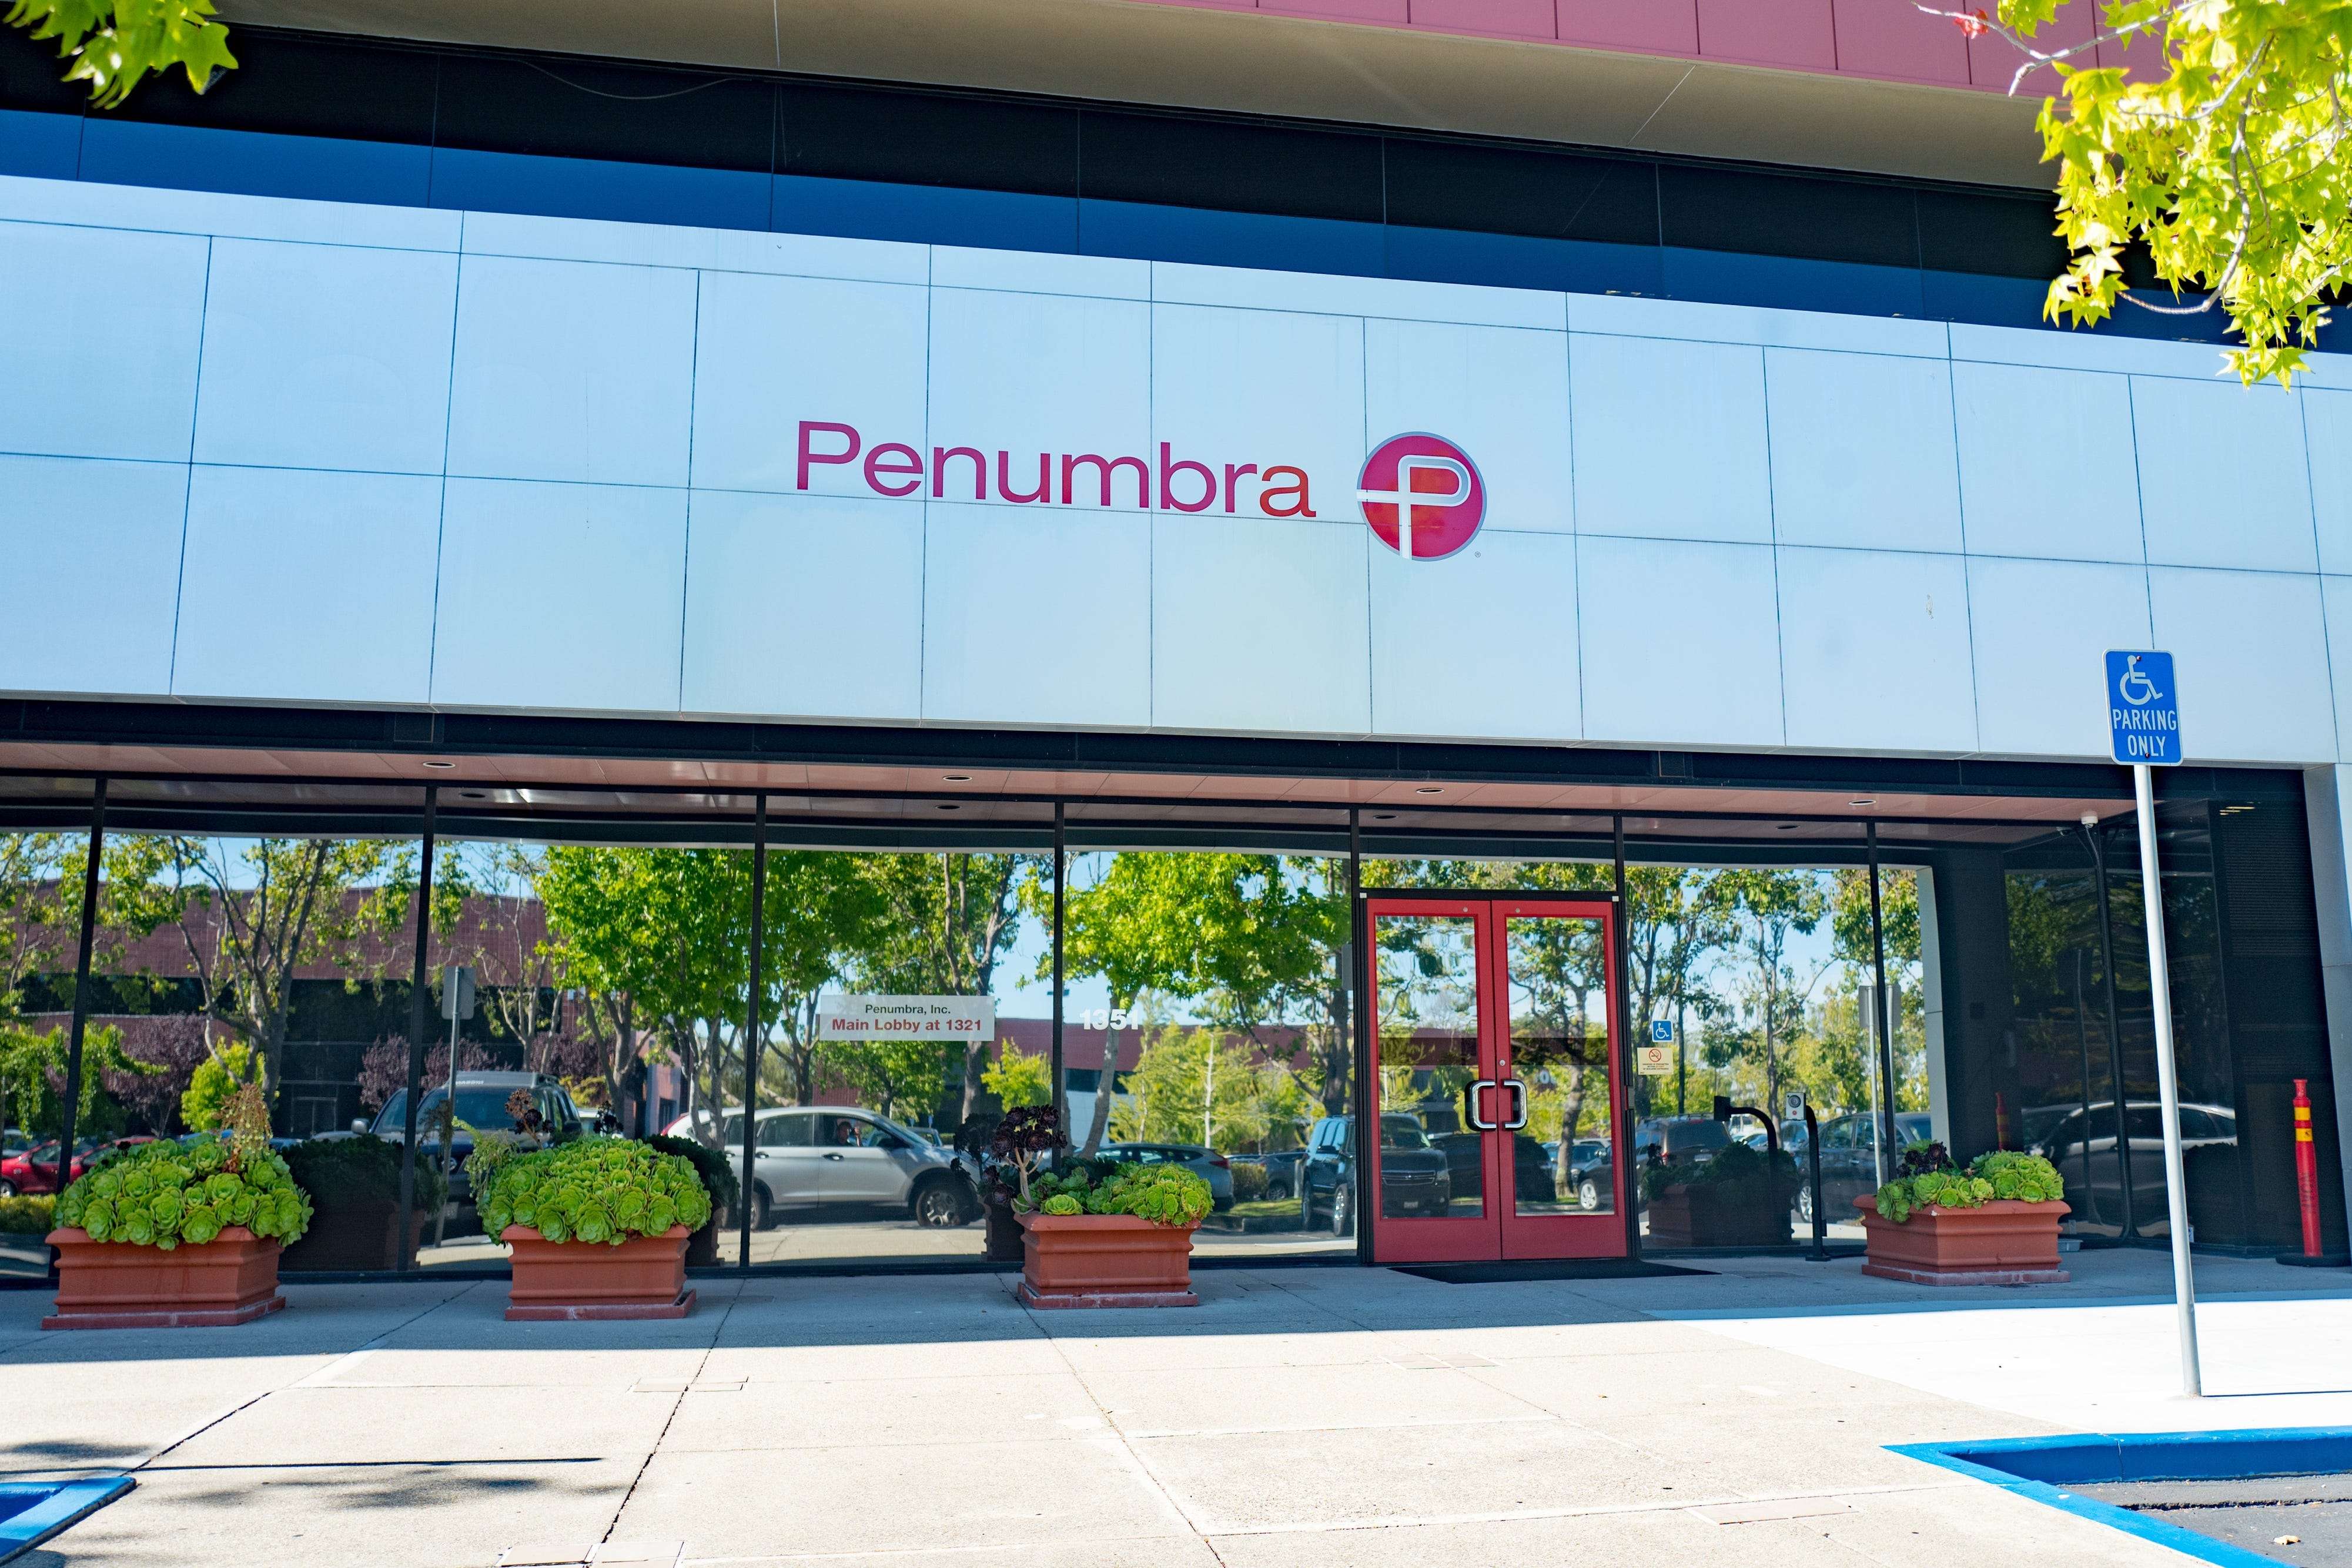 penumbra activist hedge grego gabriel fund falls manager sell says much short